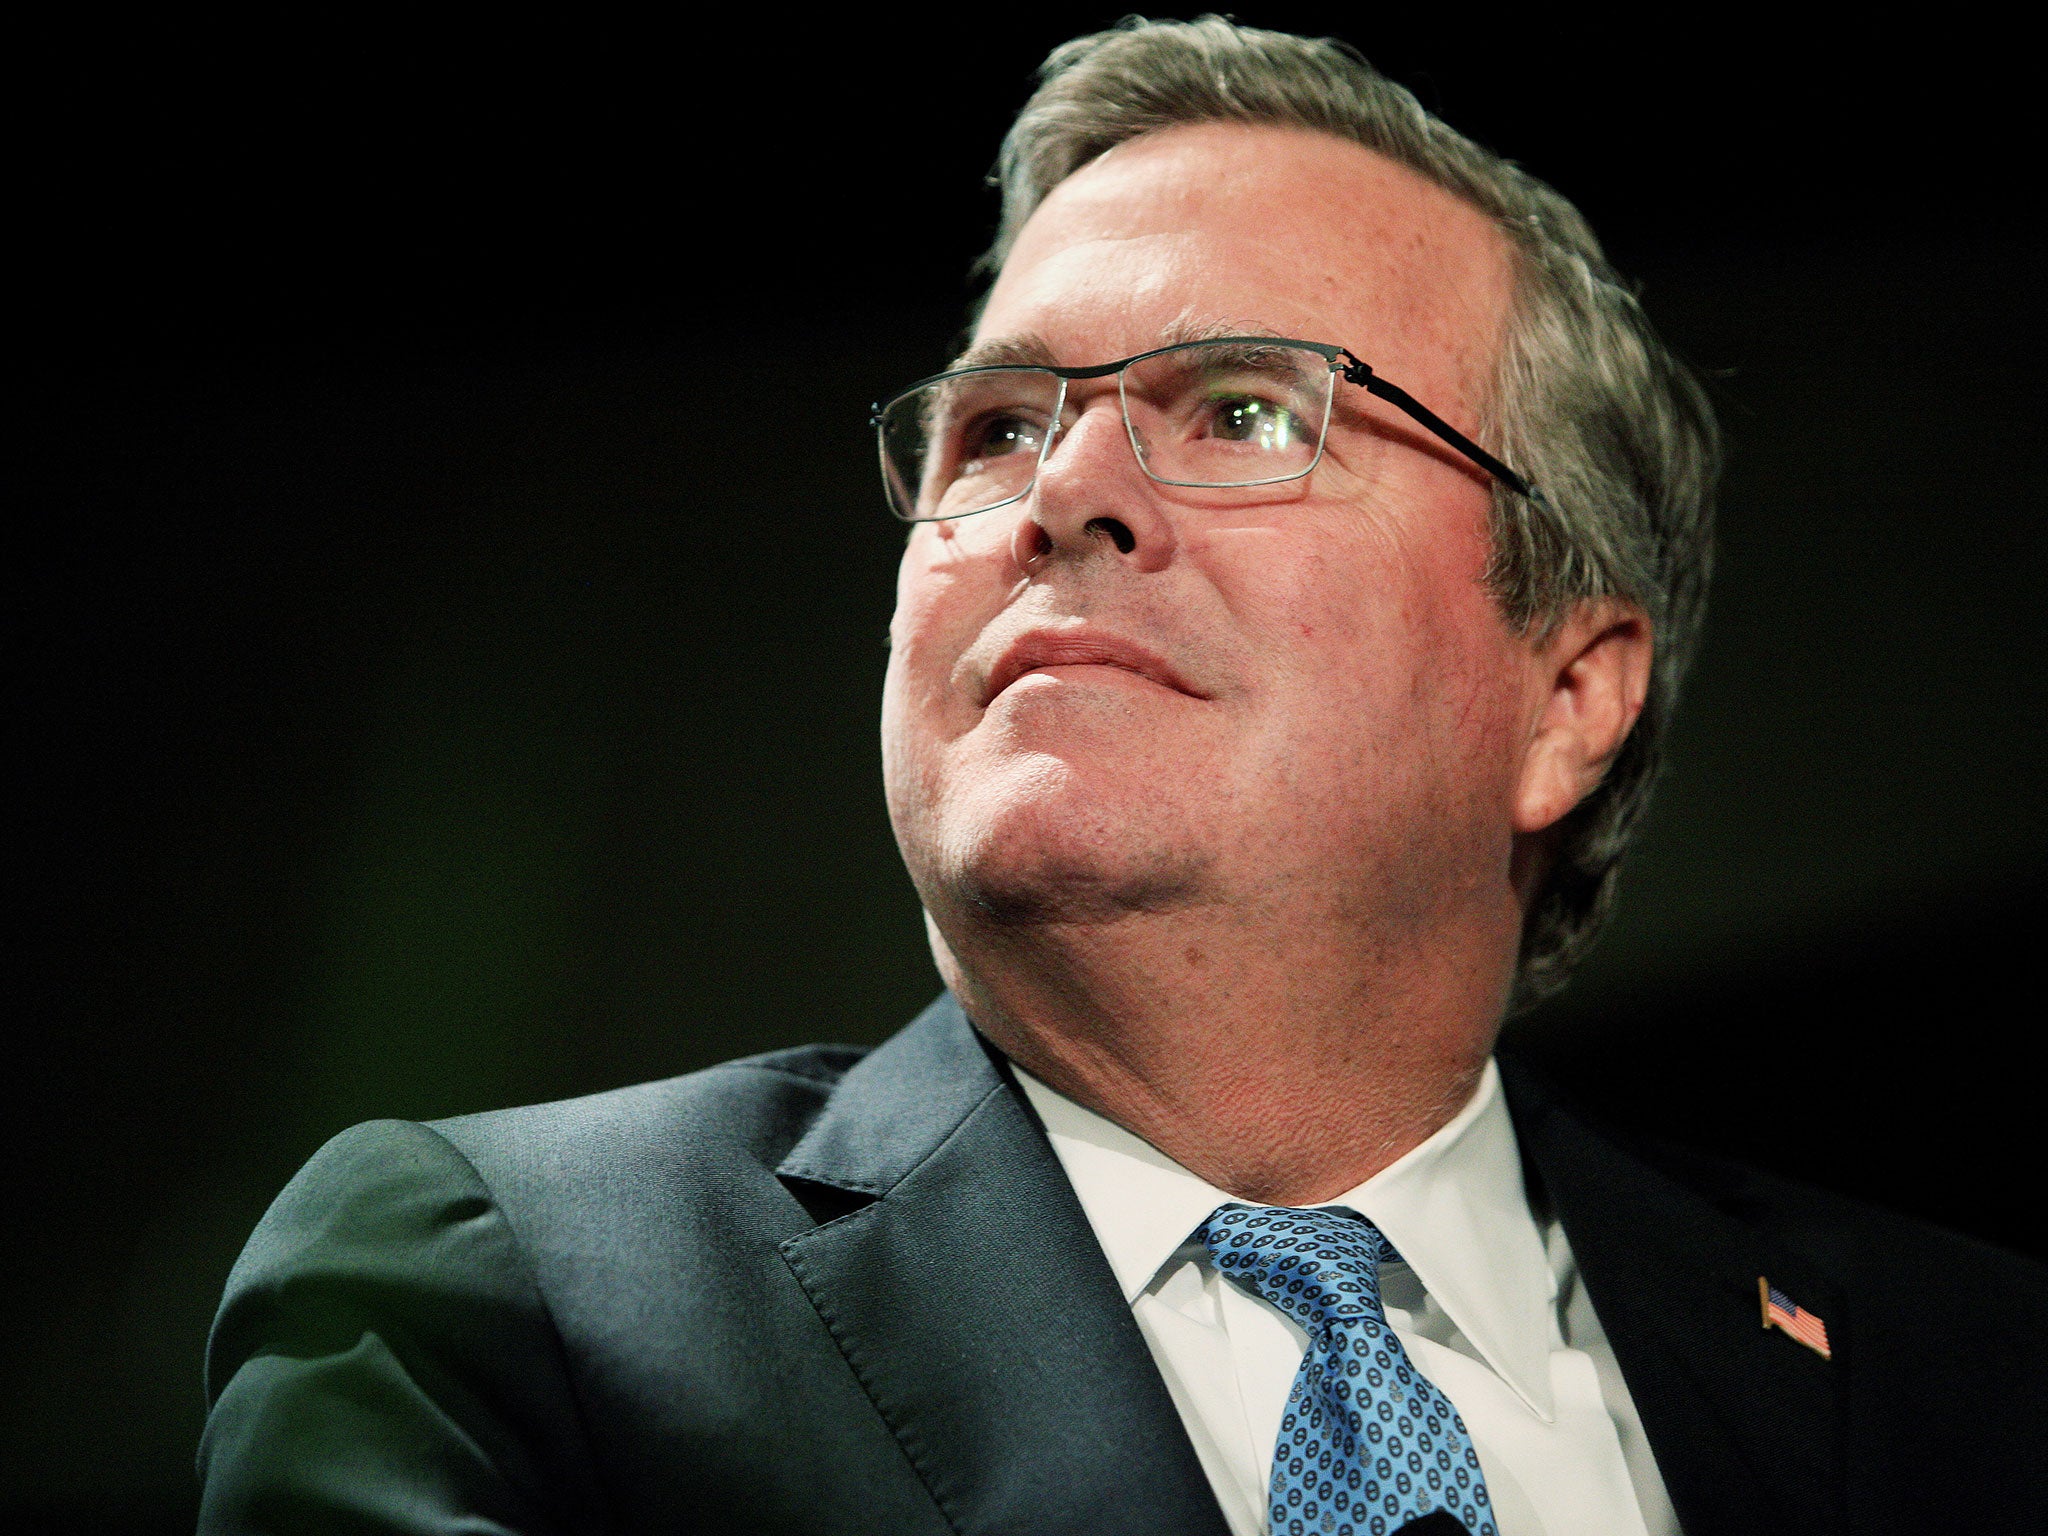 Jeb Bush has used Britain to set up a private equity fund that could possibly allow it to avoid paying tax in the US